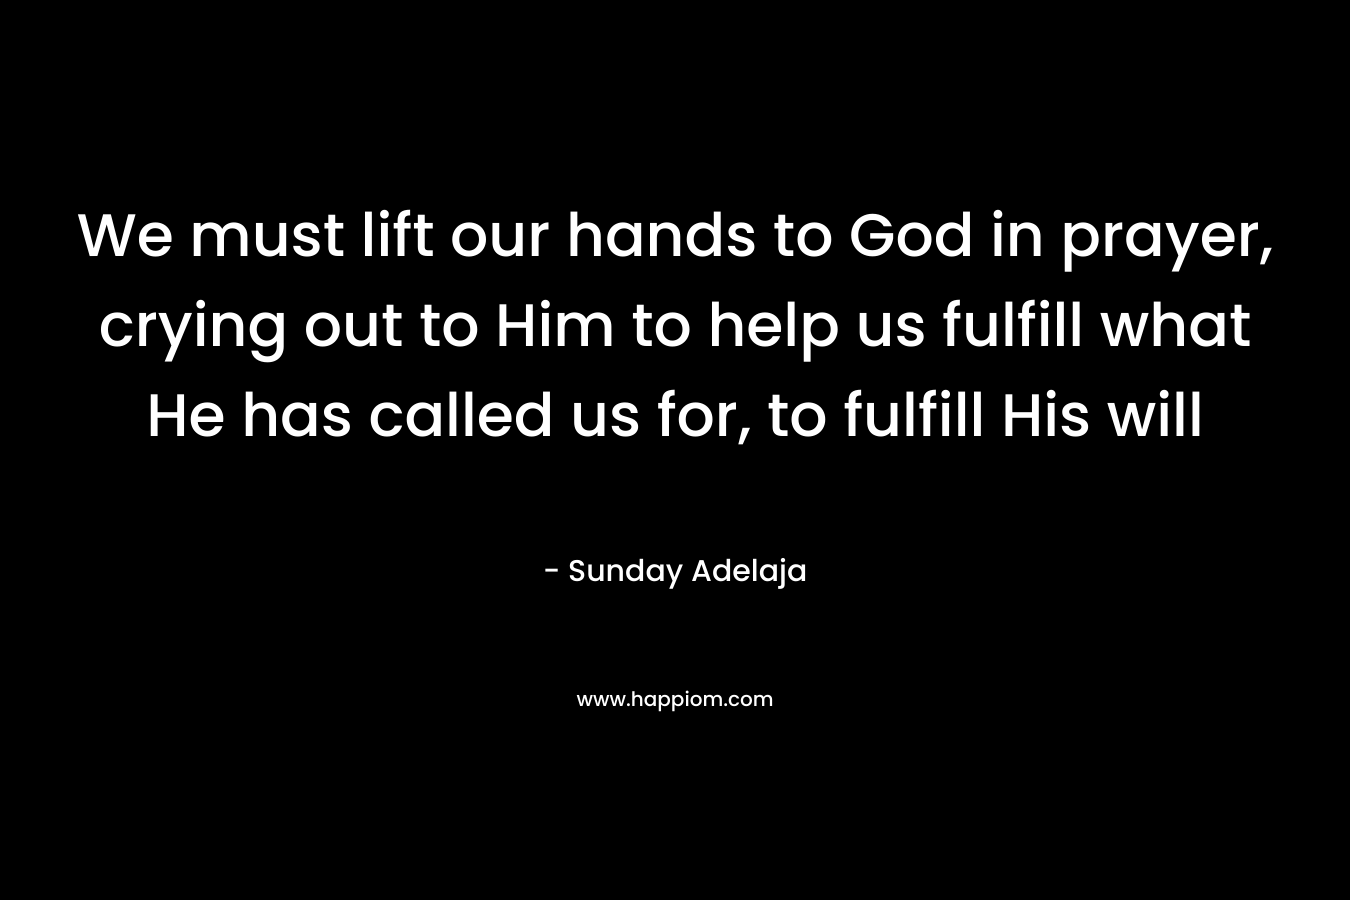 We must lift our hands to God in prayer, crying out to Him to help us fulfill what He has called us for, to fulfill His will